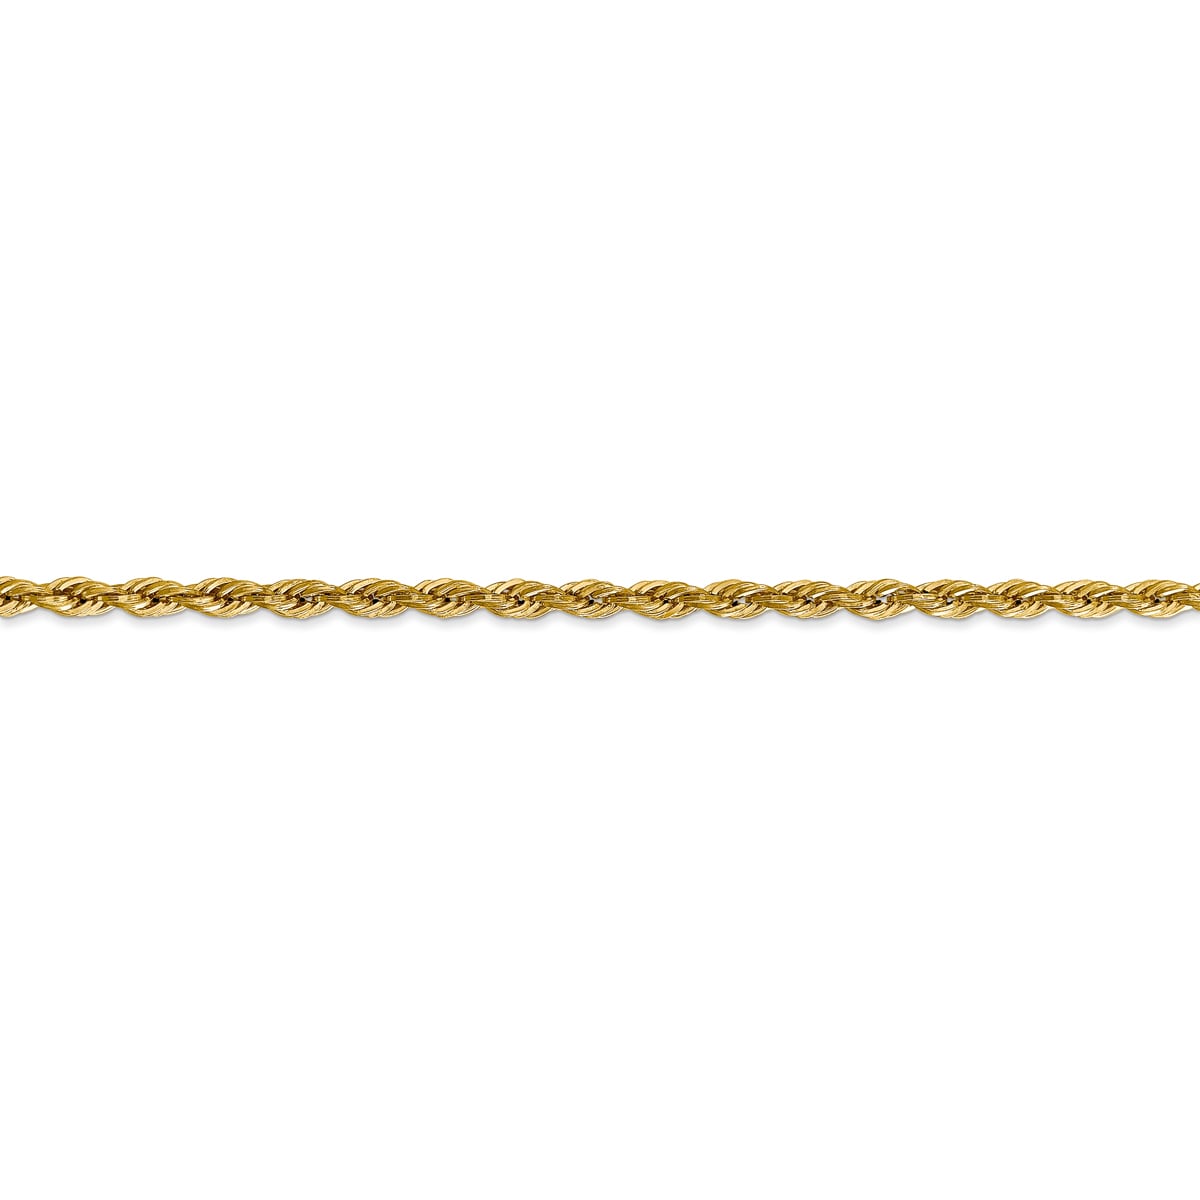 10 in Length 14 kt Yellow Gold 14k Yellow Gold 3.20mm Semi-Solid Anchor Chain